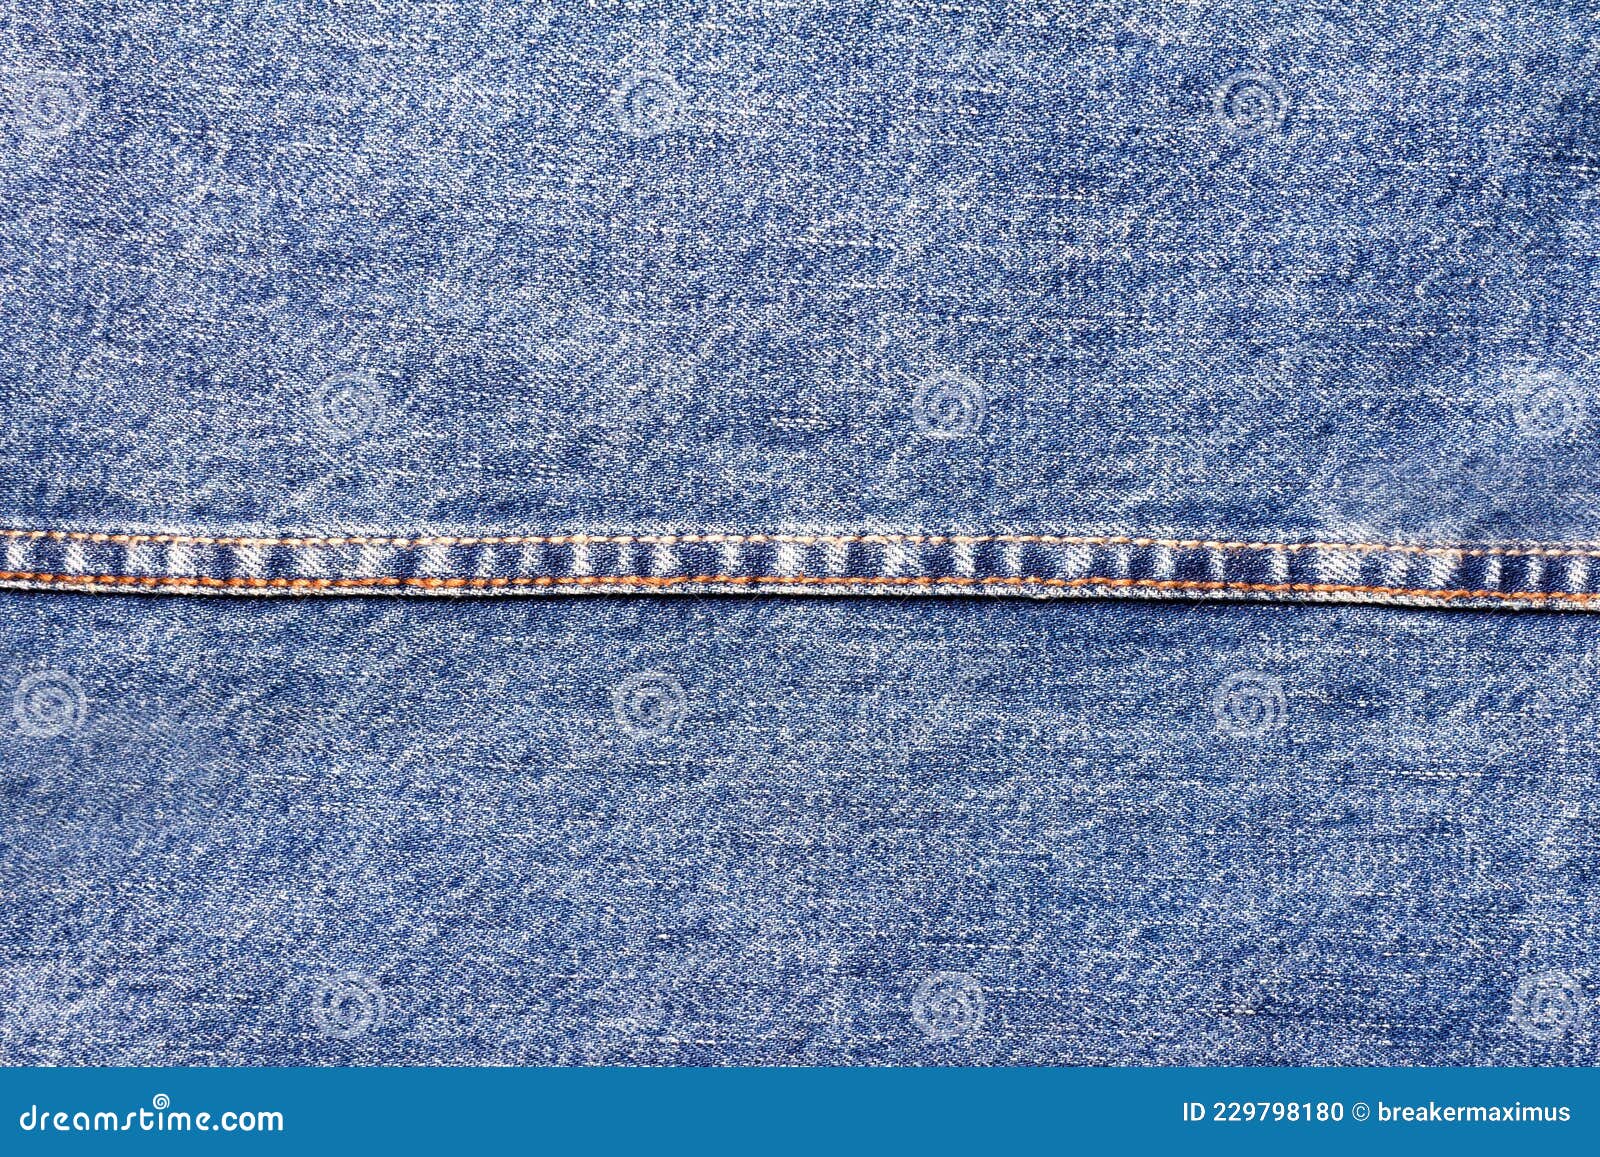 Texture Backdrop Photo of Blue Colored Denim Cloth Stock Photo - Image ...